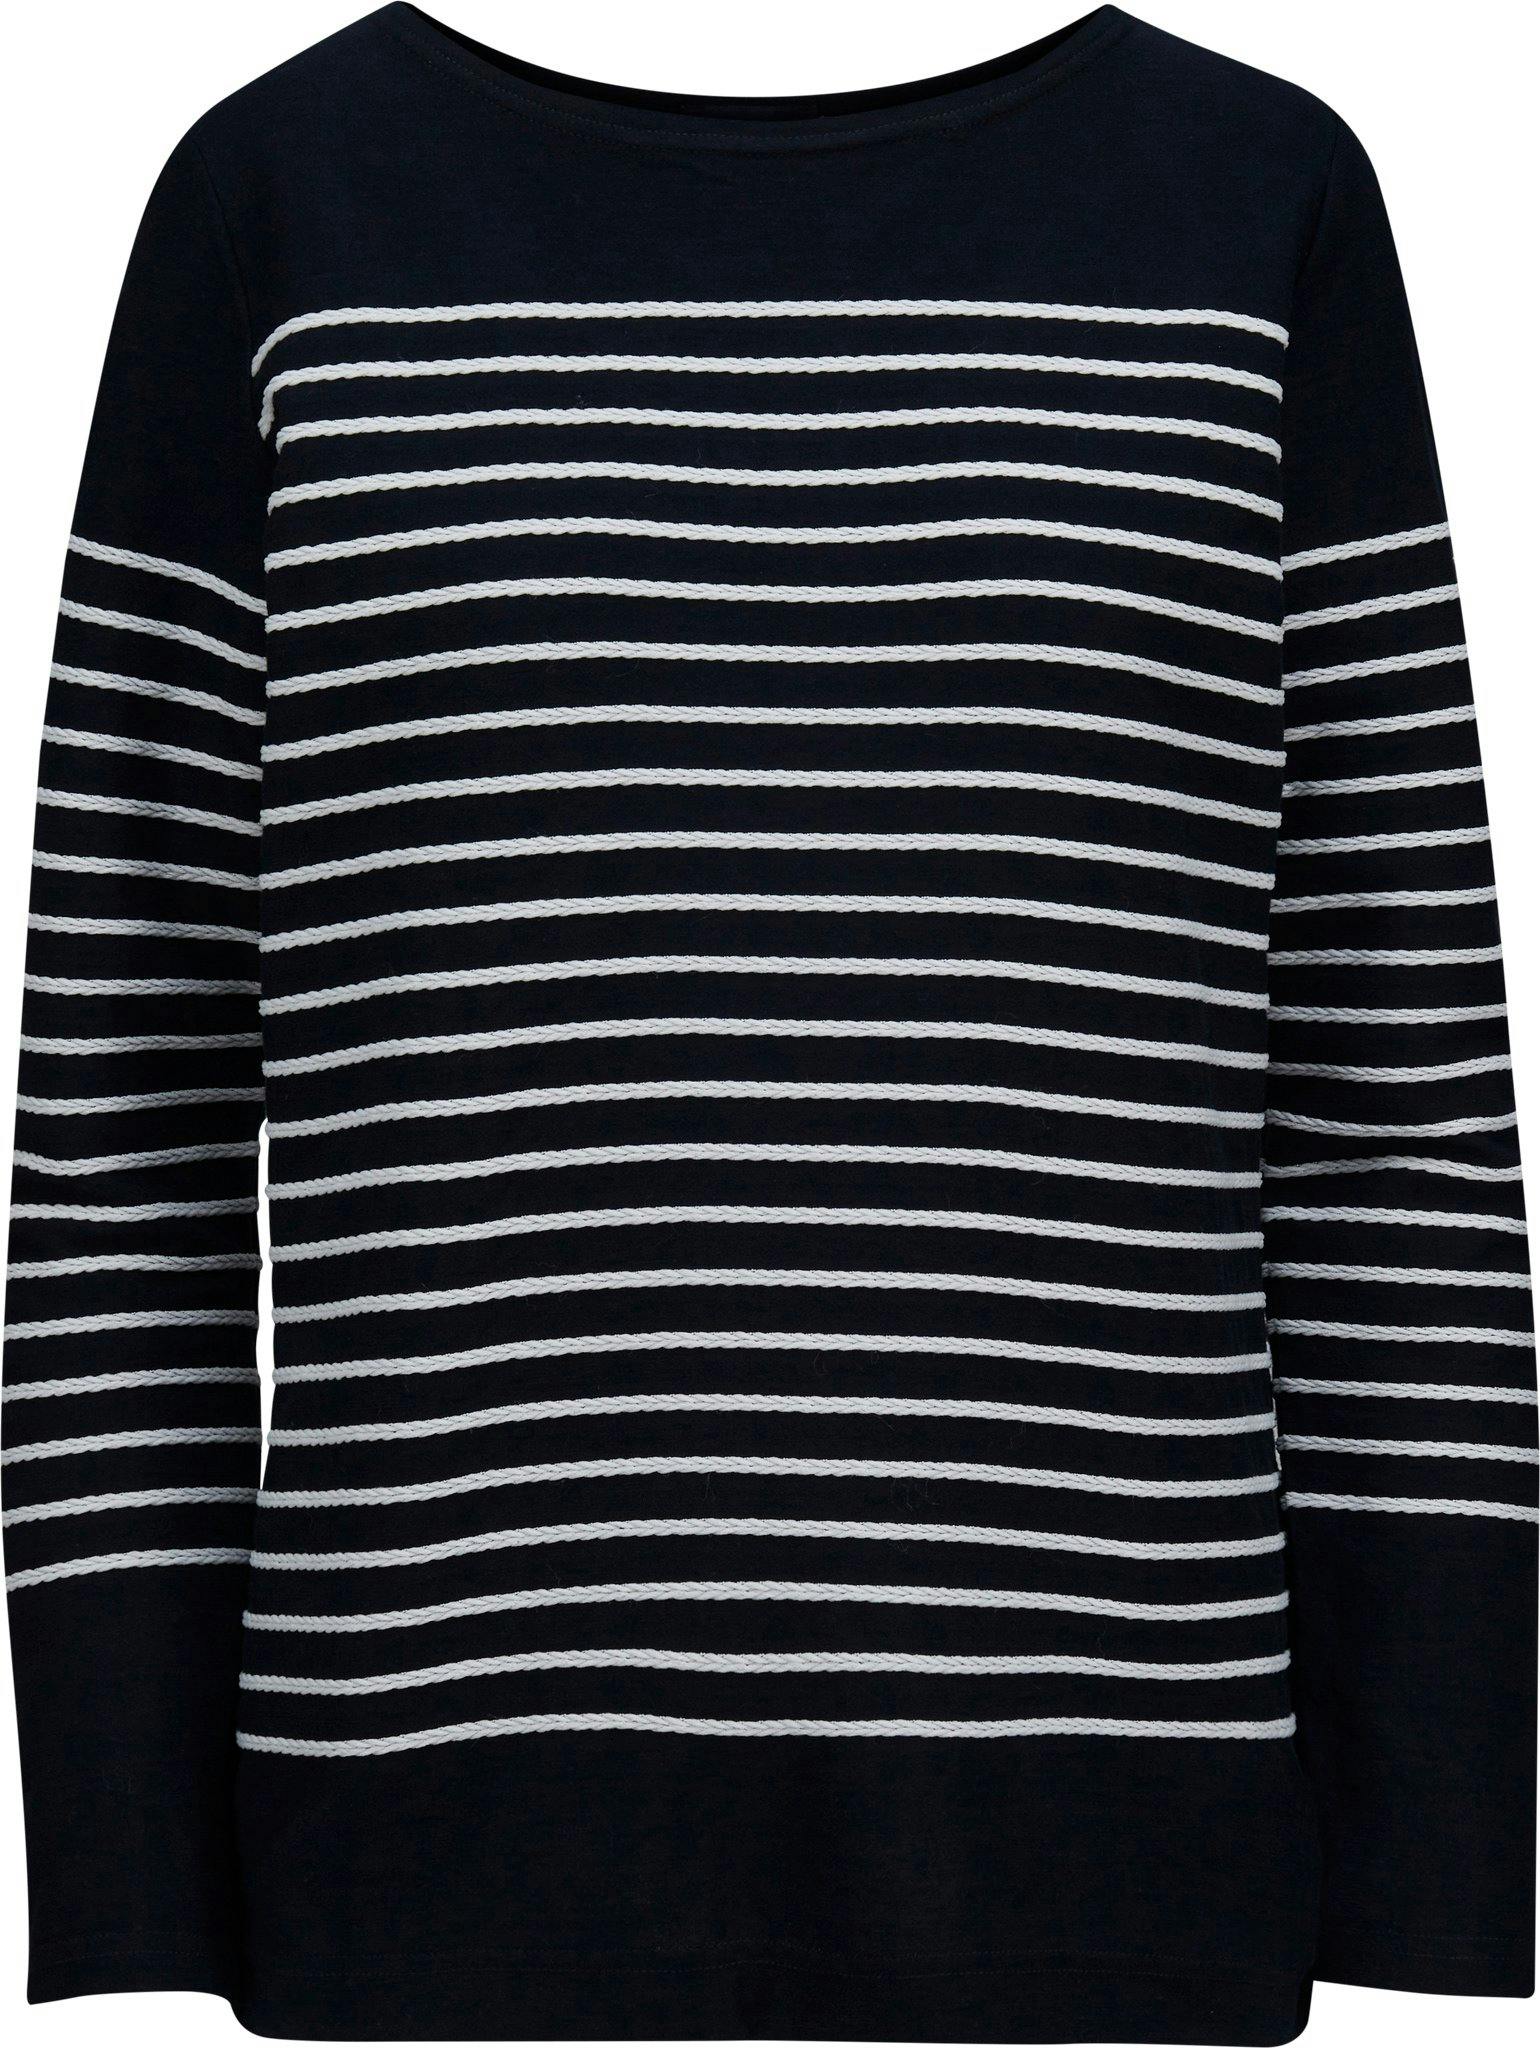 Product image for Arzal Fe Long Sleeves Breton Striped Jersey - Women's